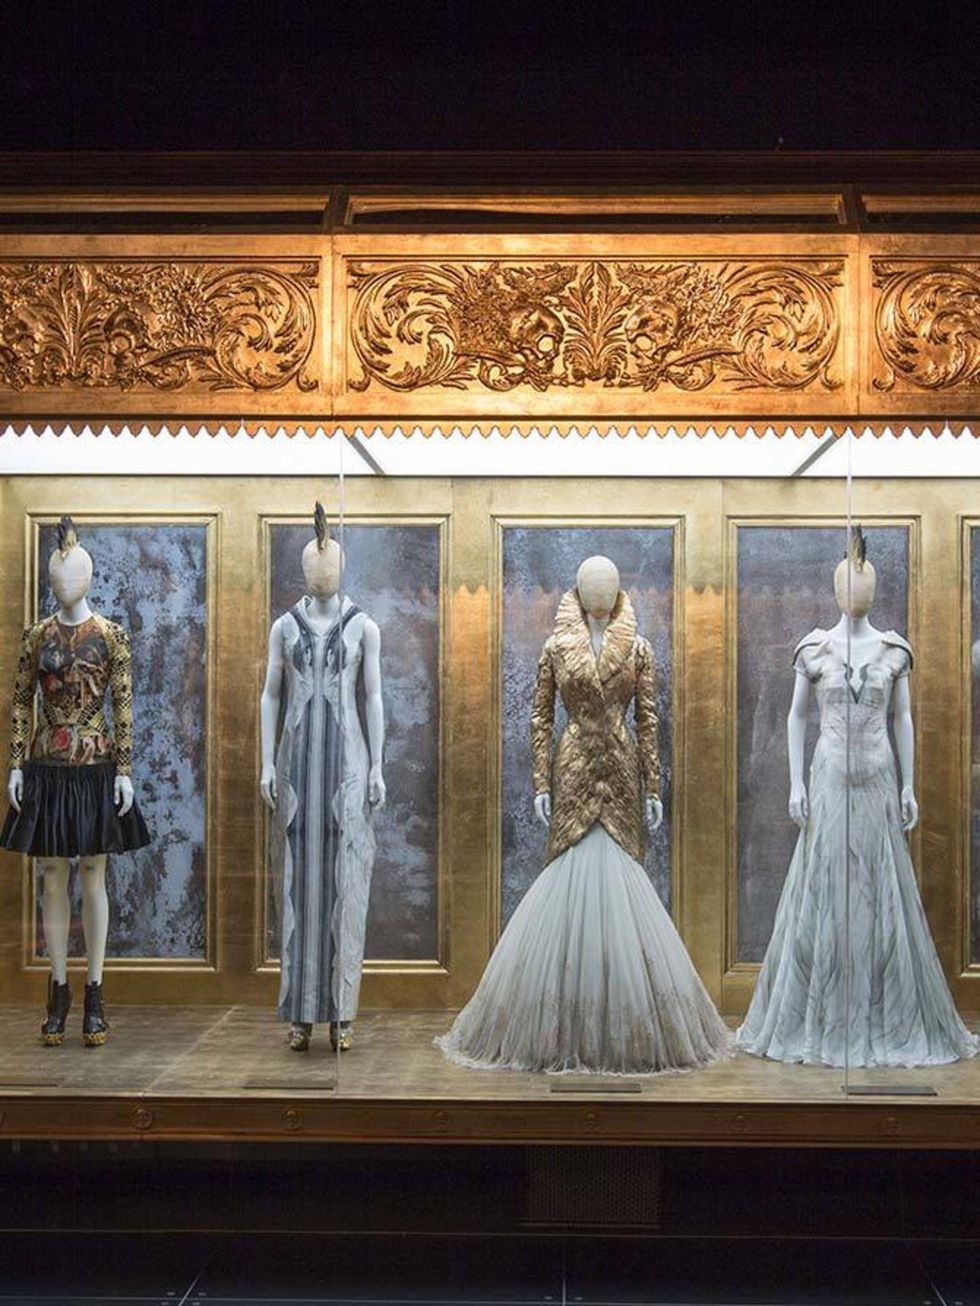 <p><strong>2) Romantic Gothic gallery.</strong></p>

<p>This takes in the rich glory of his later work, the couture-level craftsmanship housed in a golden box.</p>

<p>I WANT TO EMPOWER WOMEN. I WANT PEOPLE TO BE AFRAID OF THE WOMEN I DRESS.</p>